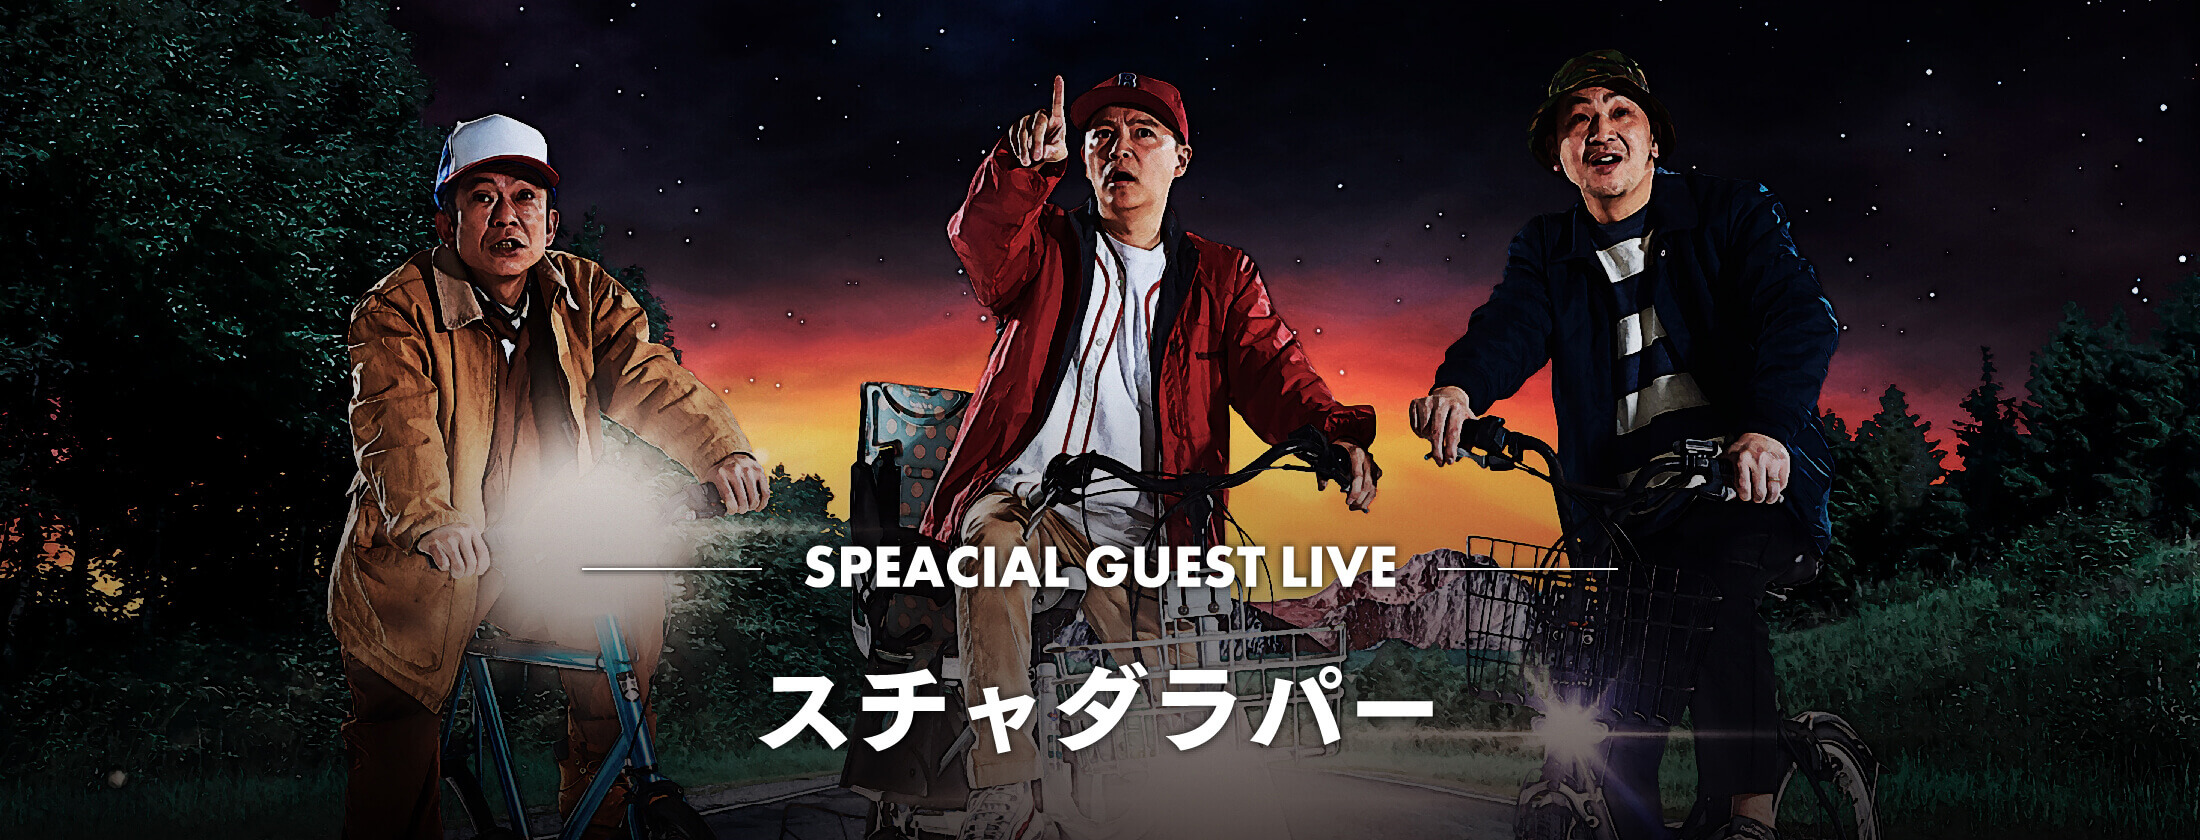 Special Guest Live スチャダラパー